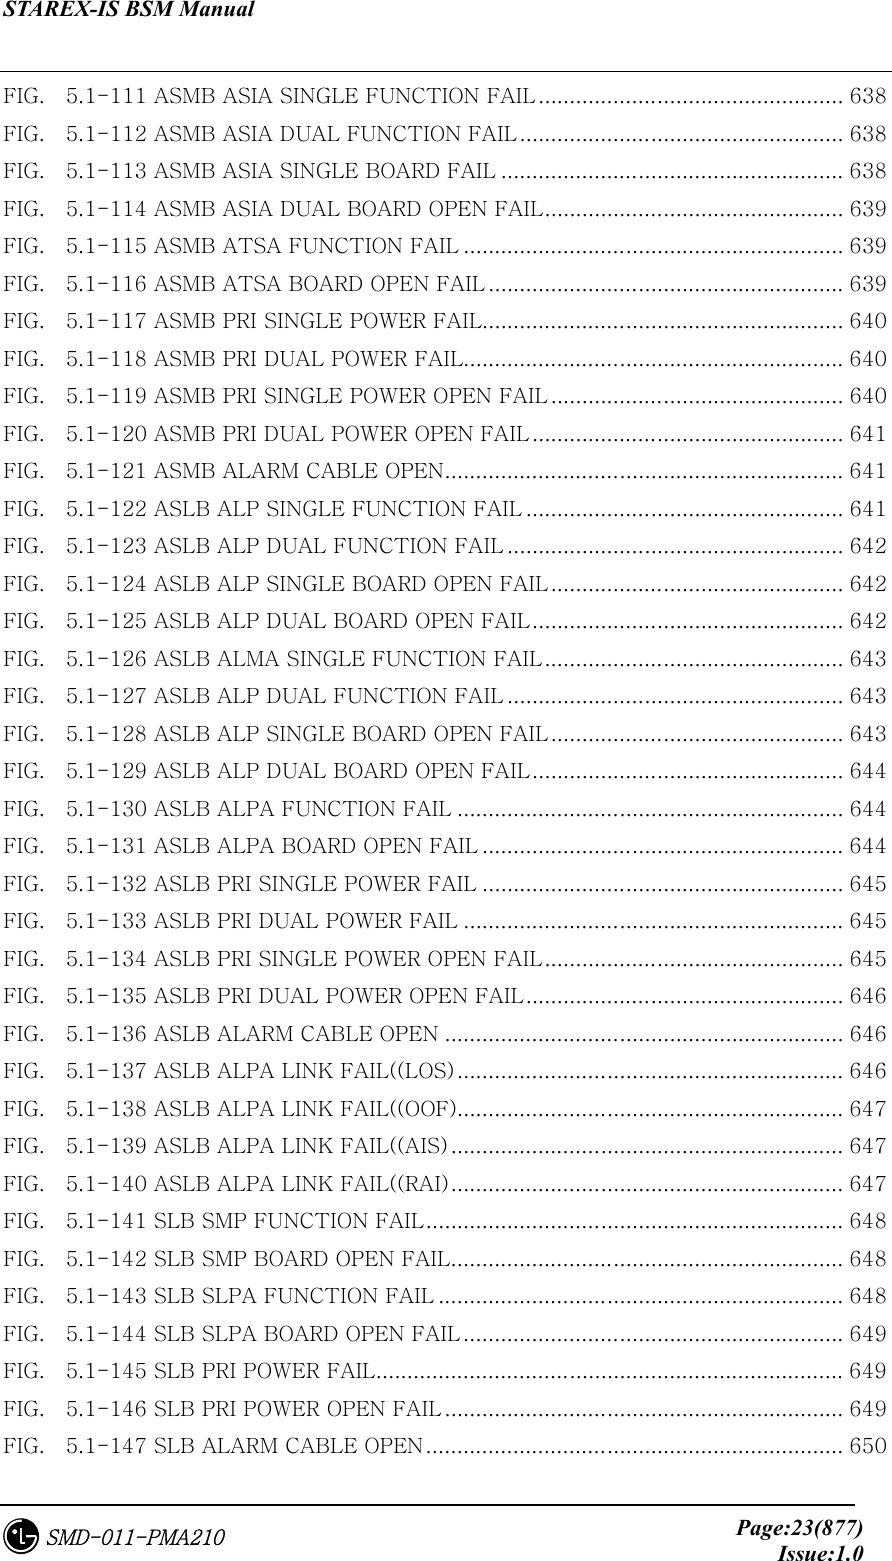 STAREX-IS BSM Manual     Page:23(877)Issue:1.0SMD-011-PMA210 FIG.    5.1-111 ASMB ASIA SINGLE FUNCTION FAIL................................................. 638 FIG.    5.1-112 ASMB ASIA DUAL FUNCTION FAIL.................................................... 638 FIG.    5.1-113 ASMB ASIA SINGLE BOARD FAIL ....................................................... 638 FIG.    5.1-114 ASMB ASIA DUAL BOARD OPEN FAIL................................................ 639 FIG.    5.1-115 ASMB ATSA FUNCTION FAIL ............................................................. 639 FIG.    5.1-116 ASMB ATSA BOARD OPEN FAIL ......................................................... 639 FIG.    5.1-117 ASMB PRI SINGLE POWER FAIL.......................................................... 640 FIG.    5.1-118 ASMB PRI DUAL POWER FAIL............................................................. 640 FIG.    5.1-119 ASMB PRI SINGLE POWER OPEN FAIL ............................................... 640 FIG.    5.1-120 ASMB PRI DUAL POWER OPEN FAIL.................................................. 641 FIG.    5.1-121 ASMB ALARM CABLE OPEN................................................................ 641 FIG.    5.1-122 ASLB ALP SINGLE FUNCTION FAIL ................................................... 641 FIG.    5.1-123 ASLB ALP DUAL FUNCTION FAIL ...................................................... 642 FIG.    5.1-124 ASLB ALP SINGLE BOARD OPEN FAIL............................................... 642 FIG.    5.1-125 ASLB ALP DUAL BOARD OPEN FAIL.................................................. 642 FIG.    5.1-126 ASLB ALMA SINGLE FUNCTION FAIL................................................ 643 FIG.    5.1-127 ASLB ALP DUAL FUNCTION FAIL ...................................................... 643 FIG.    5.1-128 ASLB ALP SINGLE BOARD OPEN FAIL............................................... 643 FIG.    5.1-129 ASLB ALP DUAL BOARD OPEN FAIL.................................................. 644 FIG.    5.1-130 ASLB ALPA FUNCTION FAIL .............................................................. 644 FIG.    5.1-131 ASLB ALPA BOARD OPEN FAIL .......................................................... 644 FIG.    5.1-132 ASLB PRI SINGLE POWER FAIL .......................................................... 645 FIG.    5.1-133 ASLB PRI DUAL POWER FAIL ............................................................. 645 FIG.    5.1-134 ASLB PRI SINGLE POWER OPEN FAIL................................................ 645 FIG.    5.1-135 ASLB PRI DUAL POWER OPEN FAIL................................................... 646 FIG.    5.1-136 ASLB ALARM CABLE OPEN ................................................................ 646 FIG.    5.1-137 ASLB ALPA LINK FAIL((LOS).............................................................. 646 FIG.    5.1-138 ASLB ALPA LINK FAIL((OOF).............................................................. 647 FIG.    5.1-139 ASLB ALPA LINK FAIL((AIS) ............................................................... 647 FIG.    5.1-140 ASLB ALPA LINK FAIL((RAI)............................................................... 647 FIG.    5.1-141 SLB SMP FUNCTION FAIL................................................................... 648 FIG.    5.1-142 SLB SMP BOARD OPEN FAIL............................................................... 648 FIG.    5.1-143 SLB SLPA FUNCTION FAIL ................................................................. 648 FIG.    5.1-144 SLB SLPA BOARD OPEN FAIL ............................................................. 649 FIG.    5.1-145 SLB PRI POWER FAIL........................................................................... 649 FIG.    5.1-146 SLB PRI POWER OPEN FAIL................................................................ 649 FIG.    5.1-147 SLB ALARM CABLE OPEN................................................................... 650 